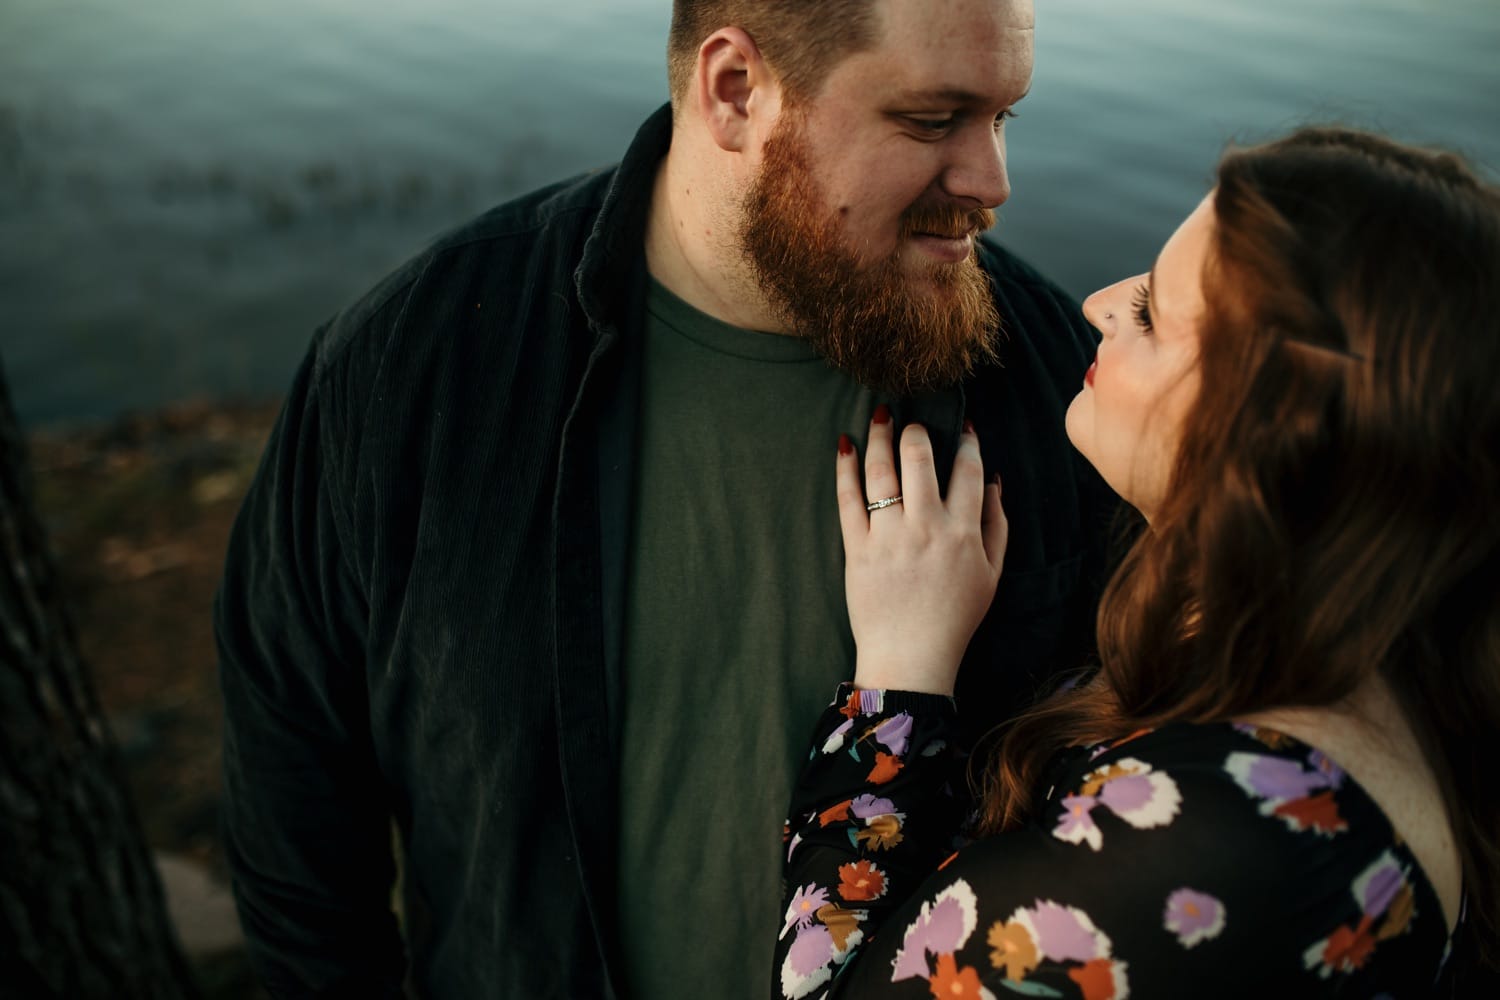 engagement-session-by-the-arkansas-river-arkansas-wedding-collection